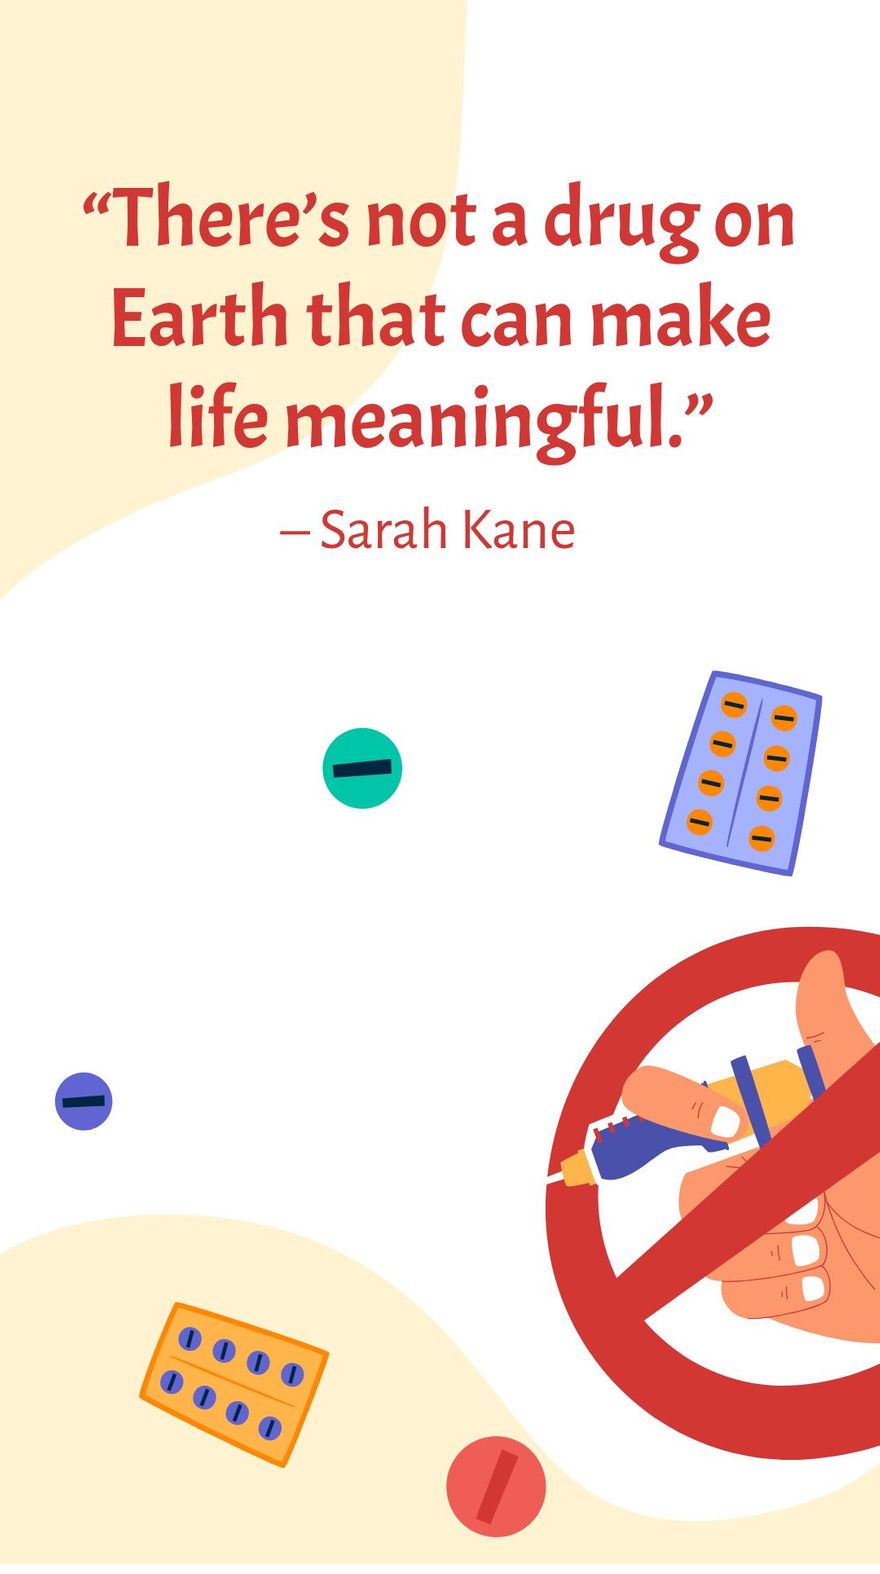 Sarah Kane - There’s Not a Drug on Earth That Can Make Life Meaningful.